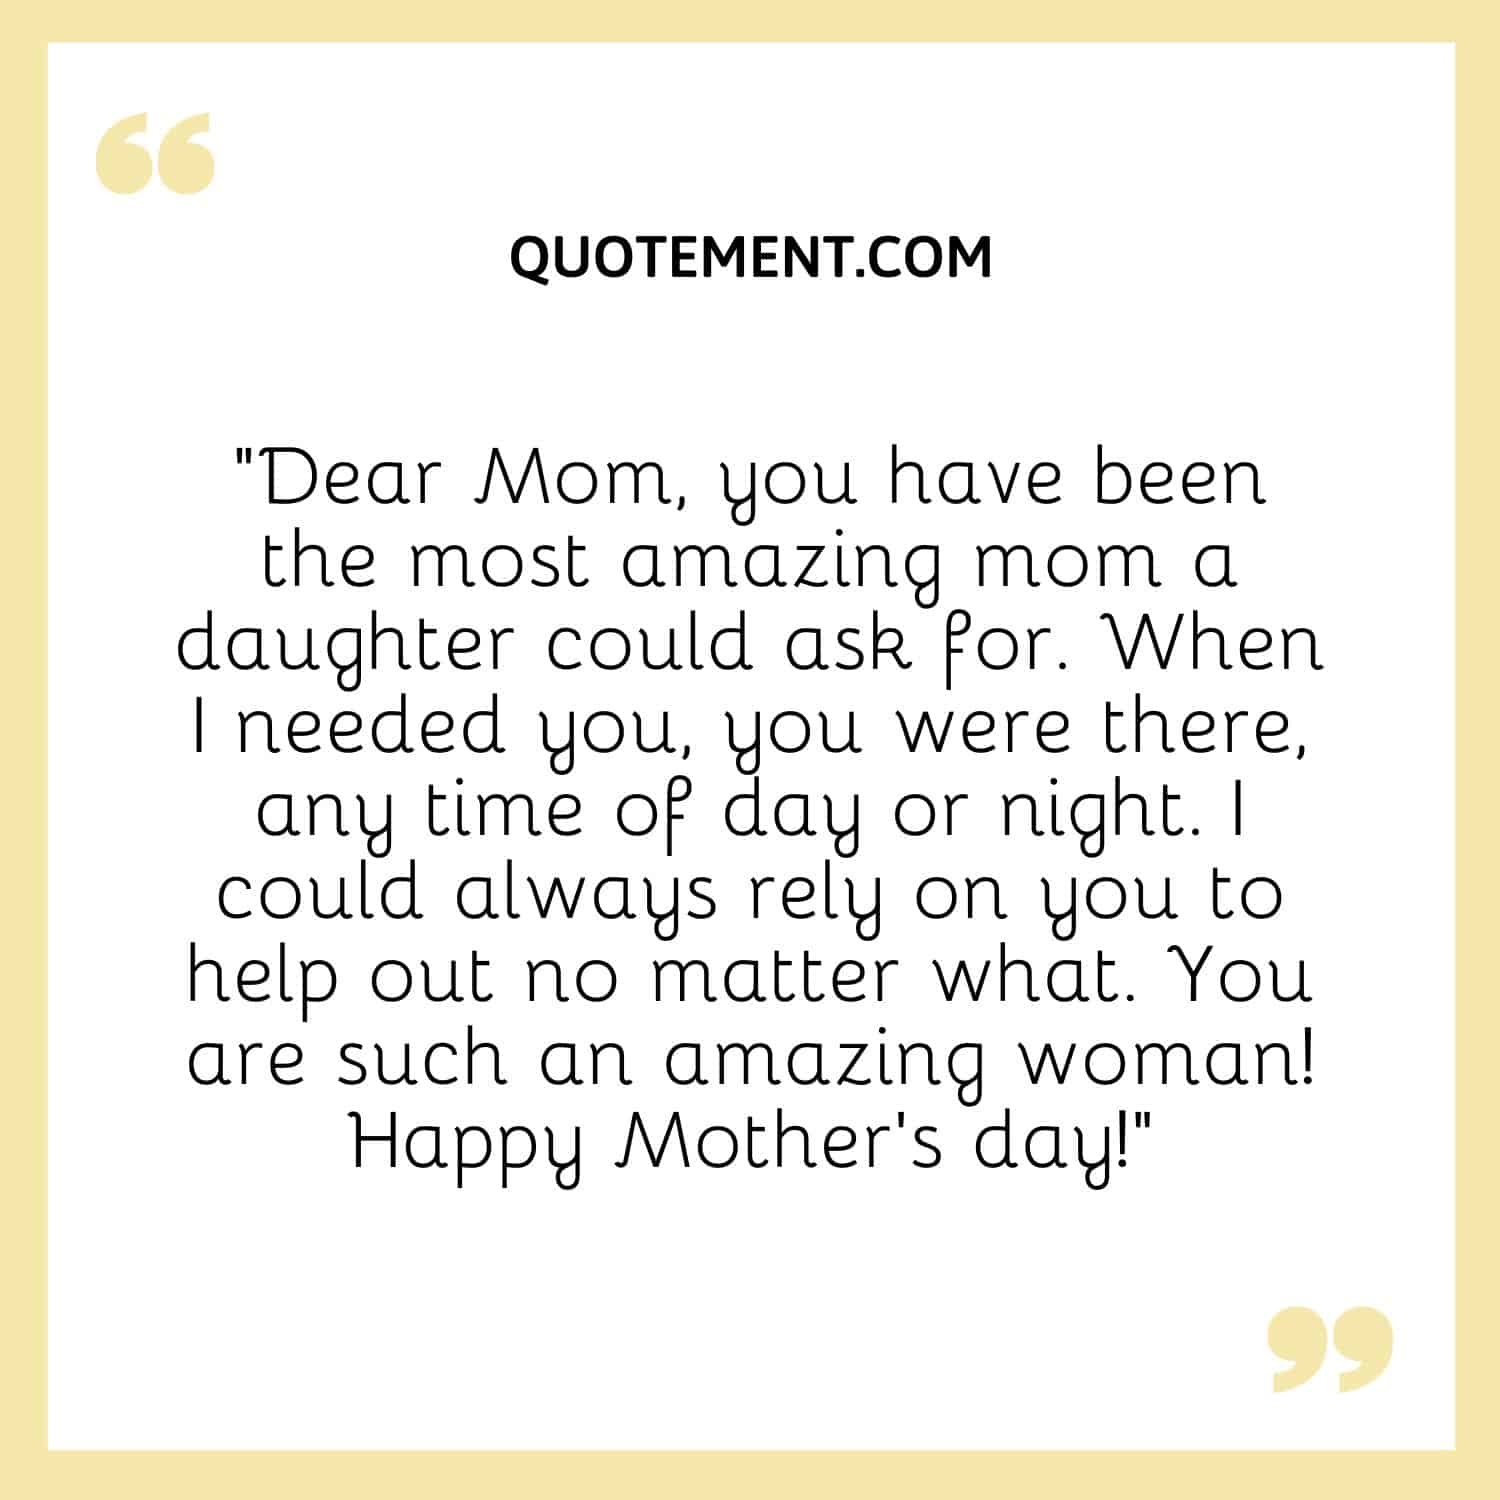 Dear Mom, you have been the most amazing mom a daughter could ask for